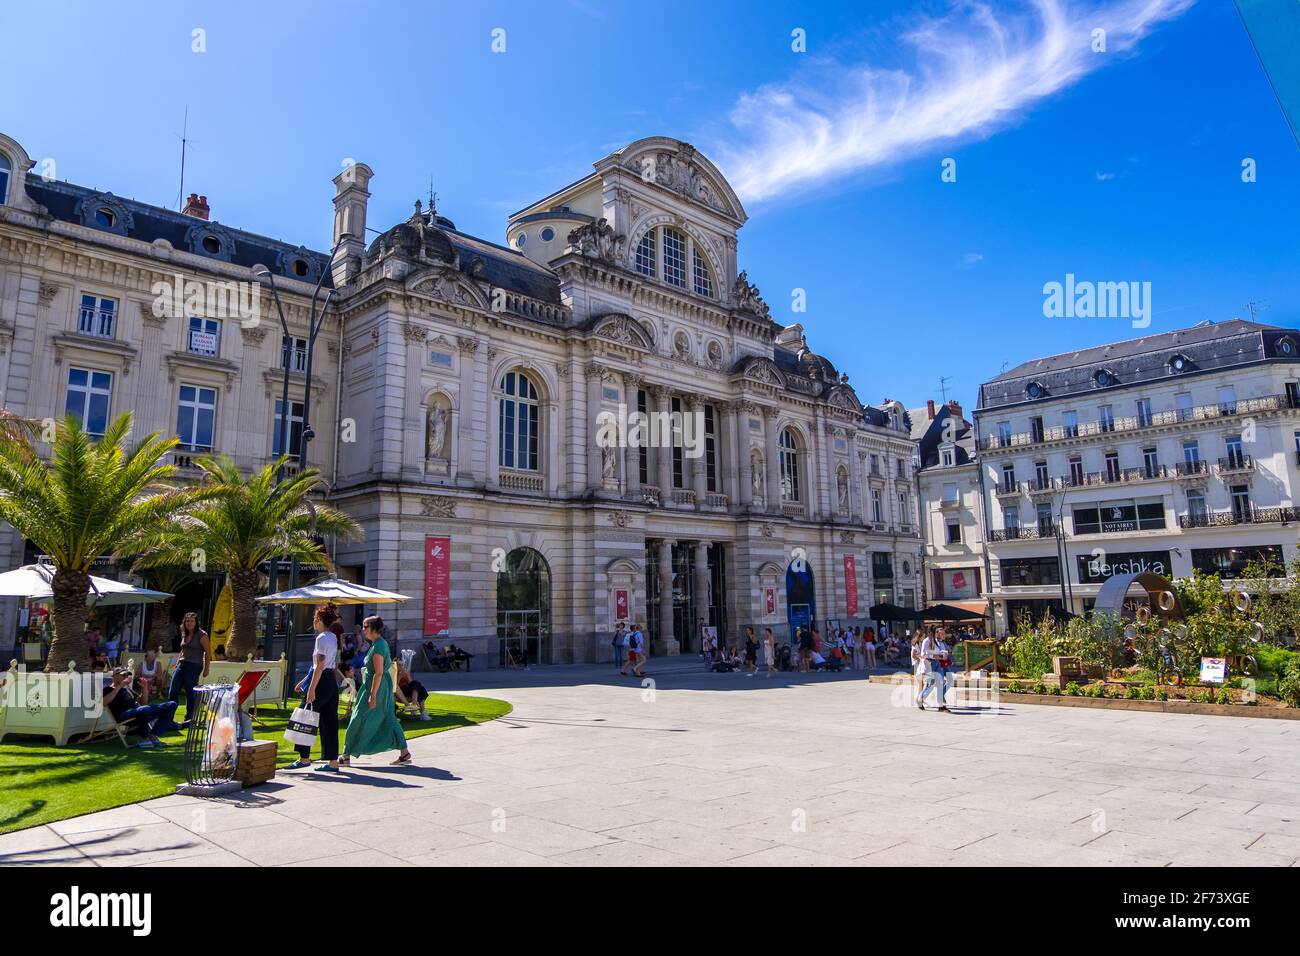 Angers, France - August 23, 2019: Grand Theater on Place du Ralliement  Square in the city center of Angers in Maine et Loire department in France  Stock Photo - Alamy